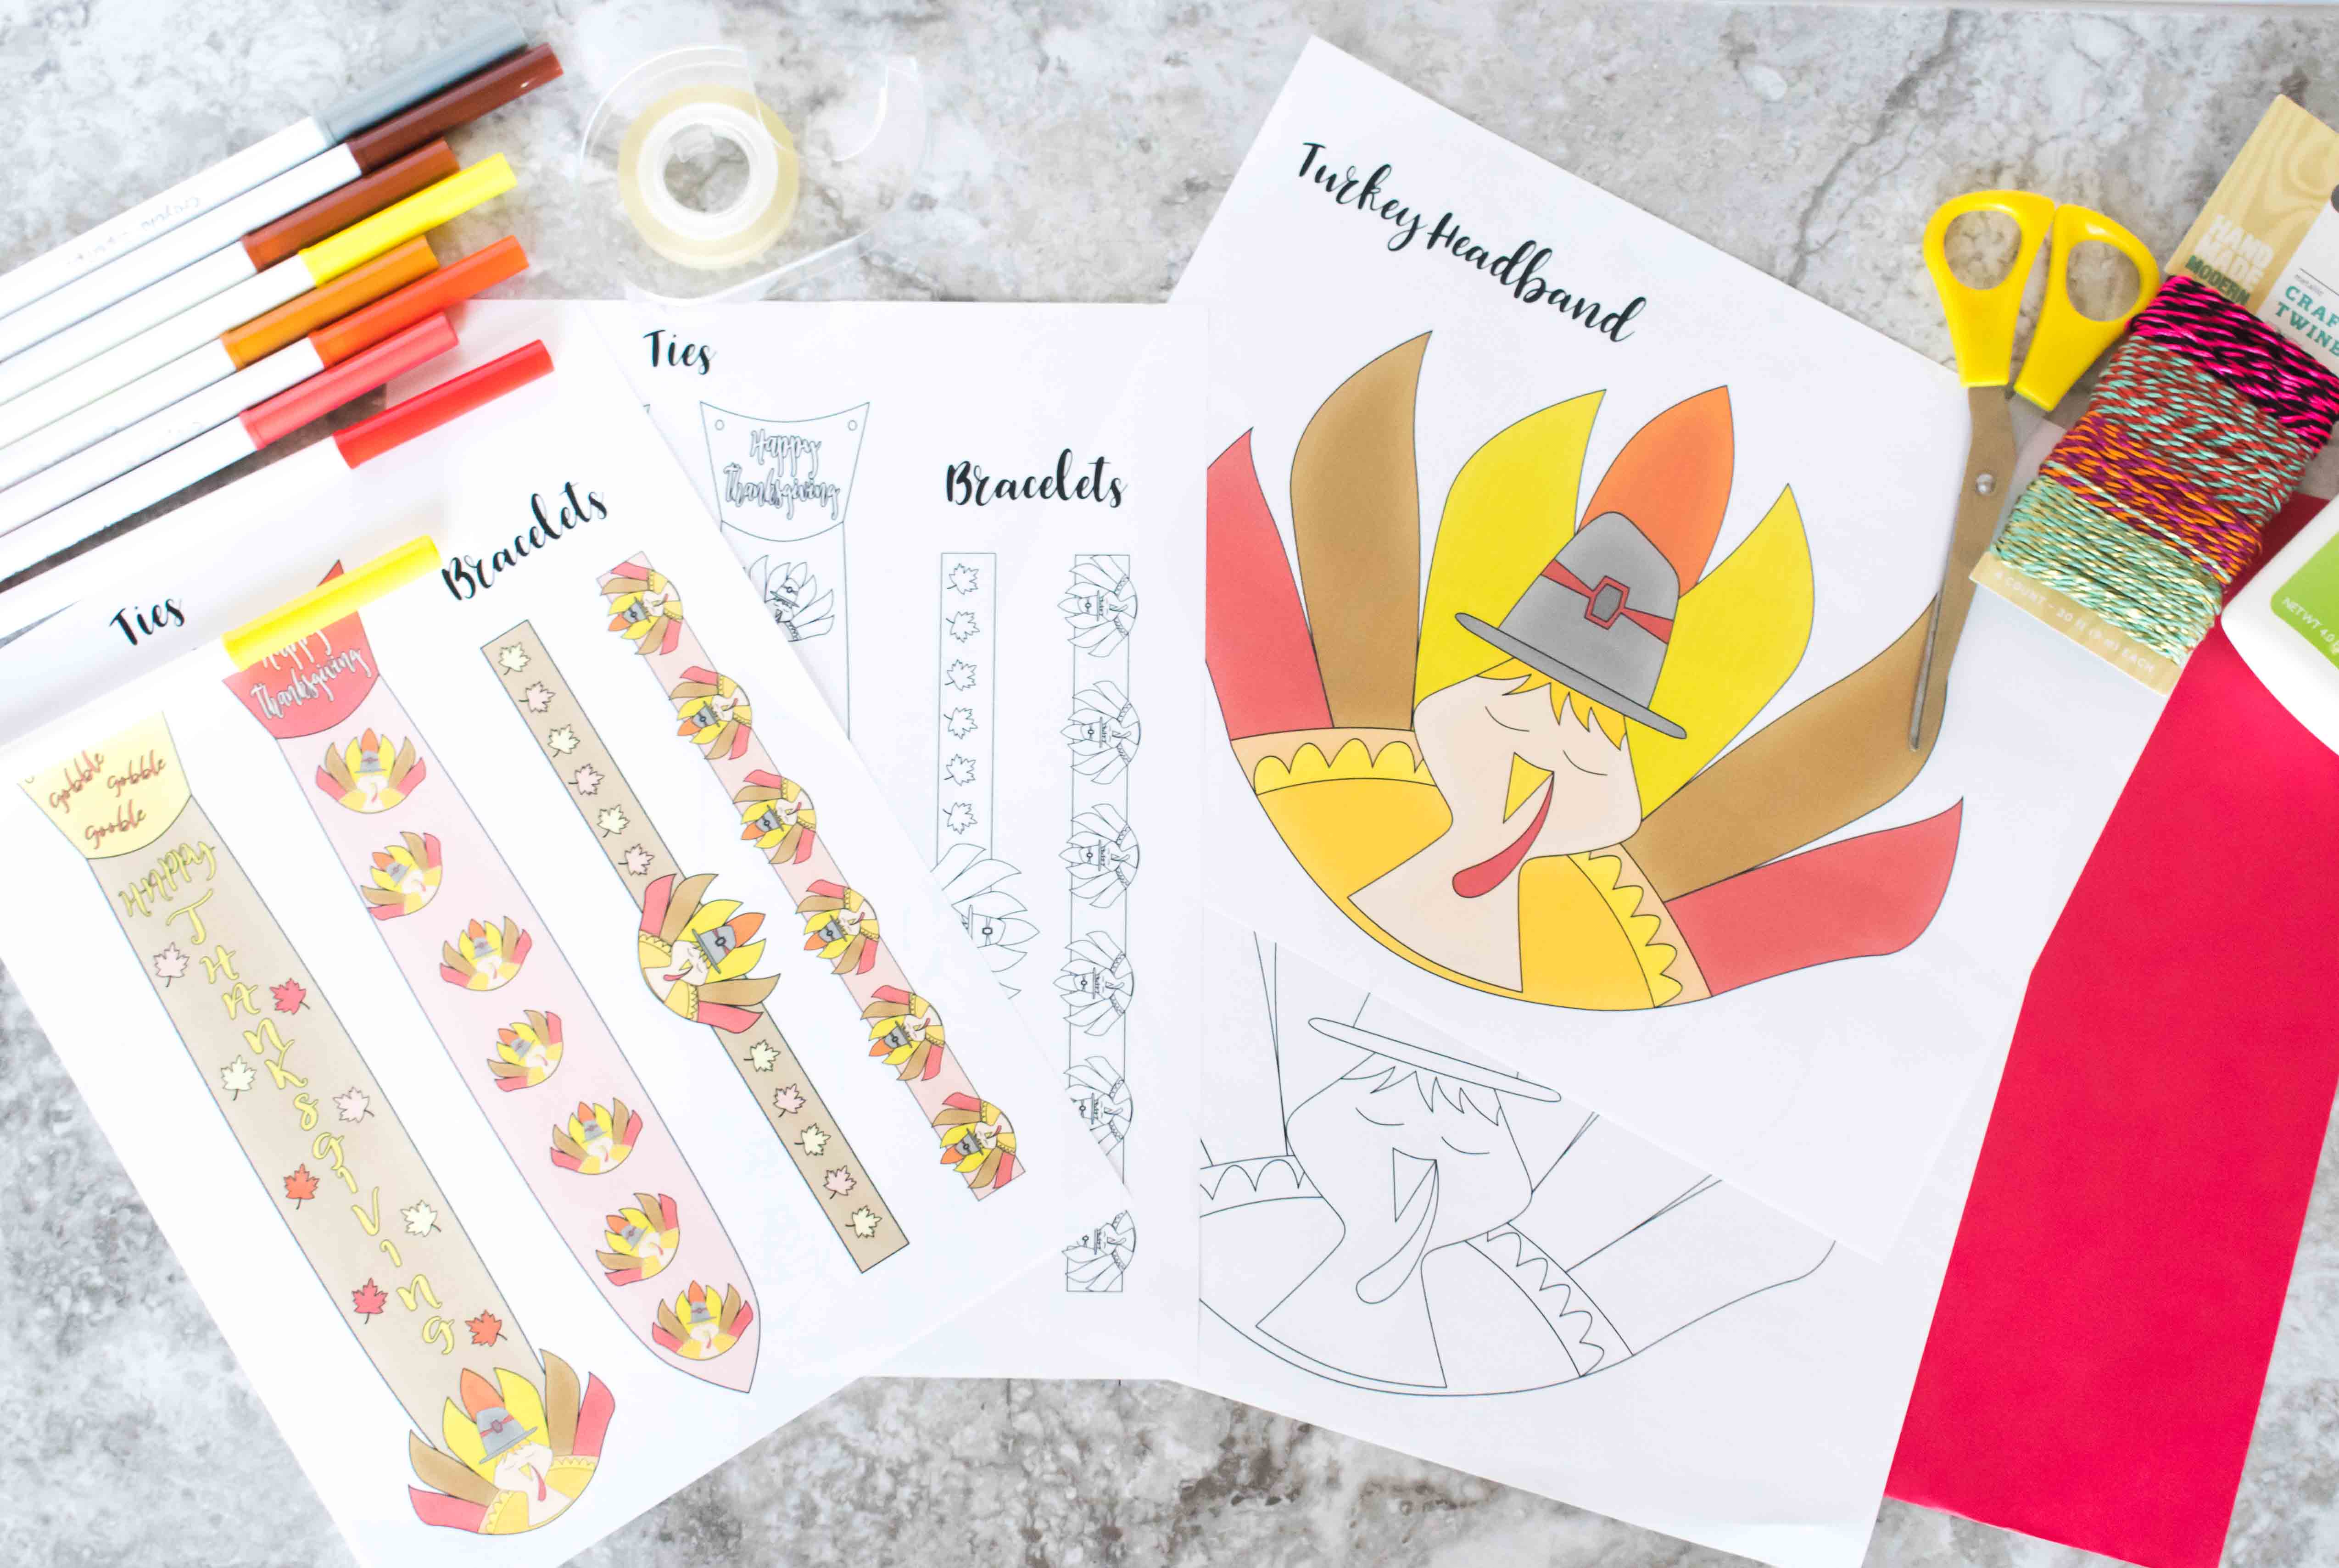 Your kids will love this Thanksgiving Craft! They will look so CUTE and ADORABLE with these Turkey Headband, Ties and Bracelets